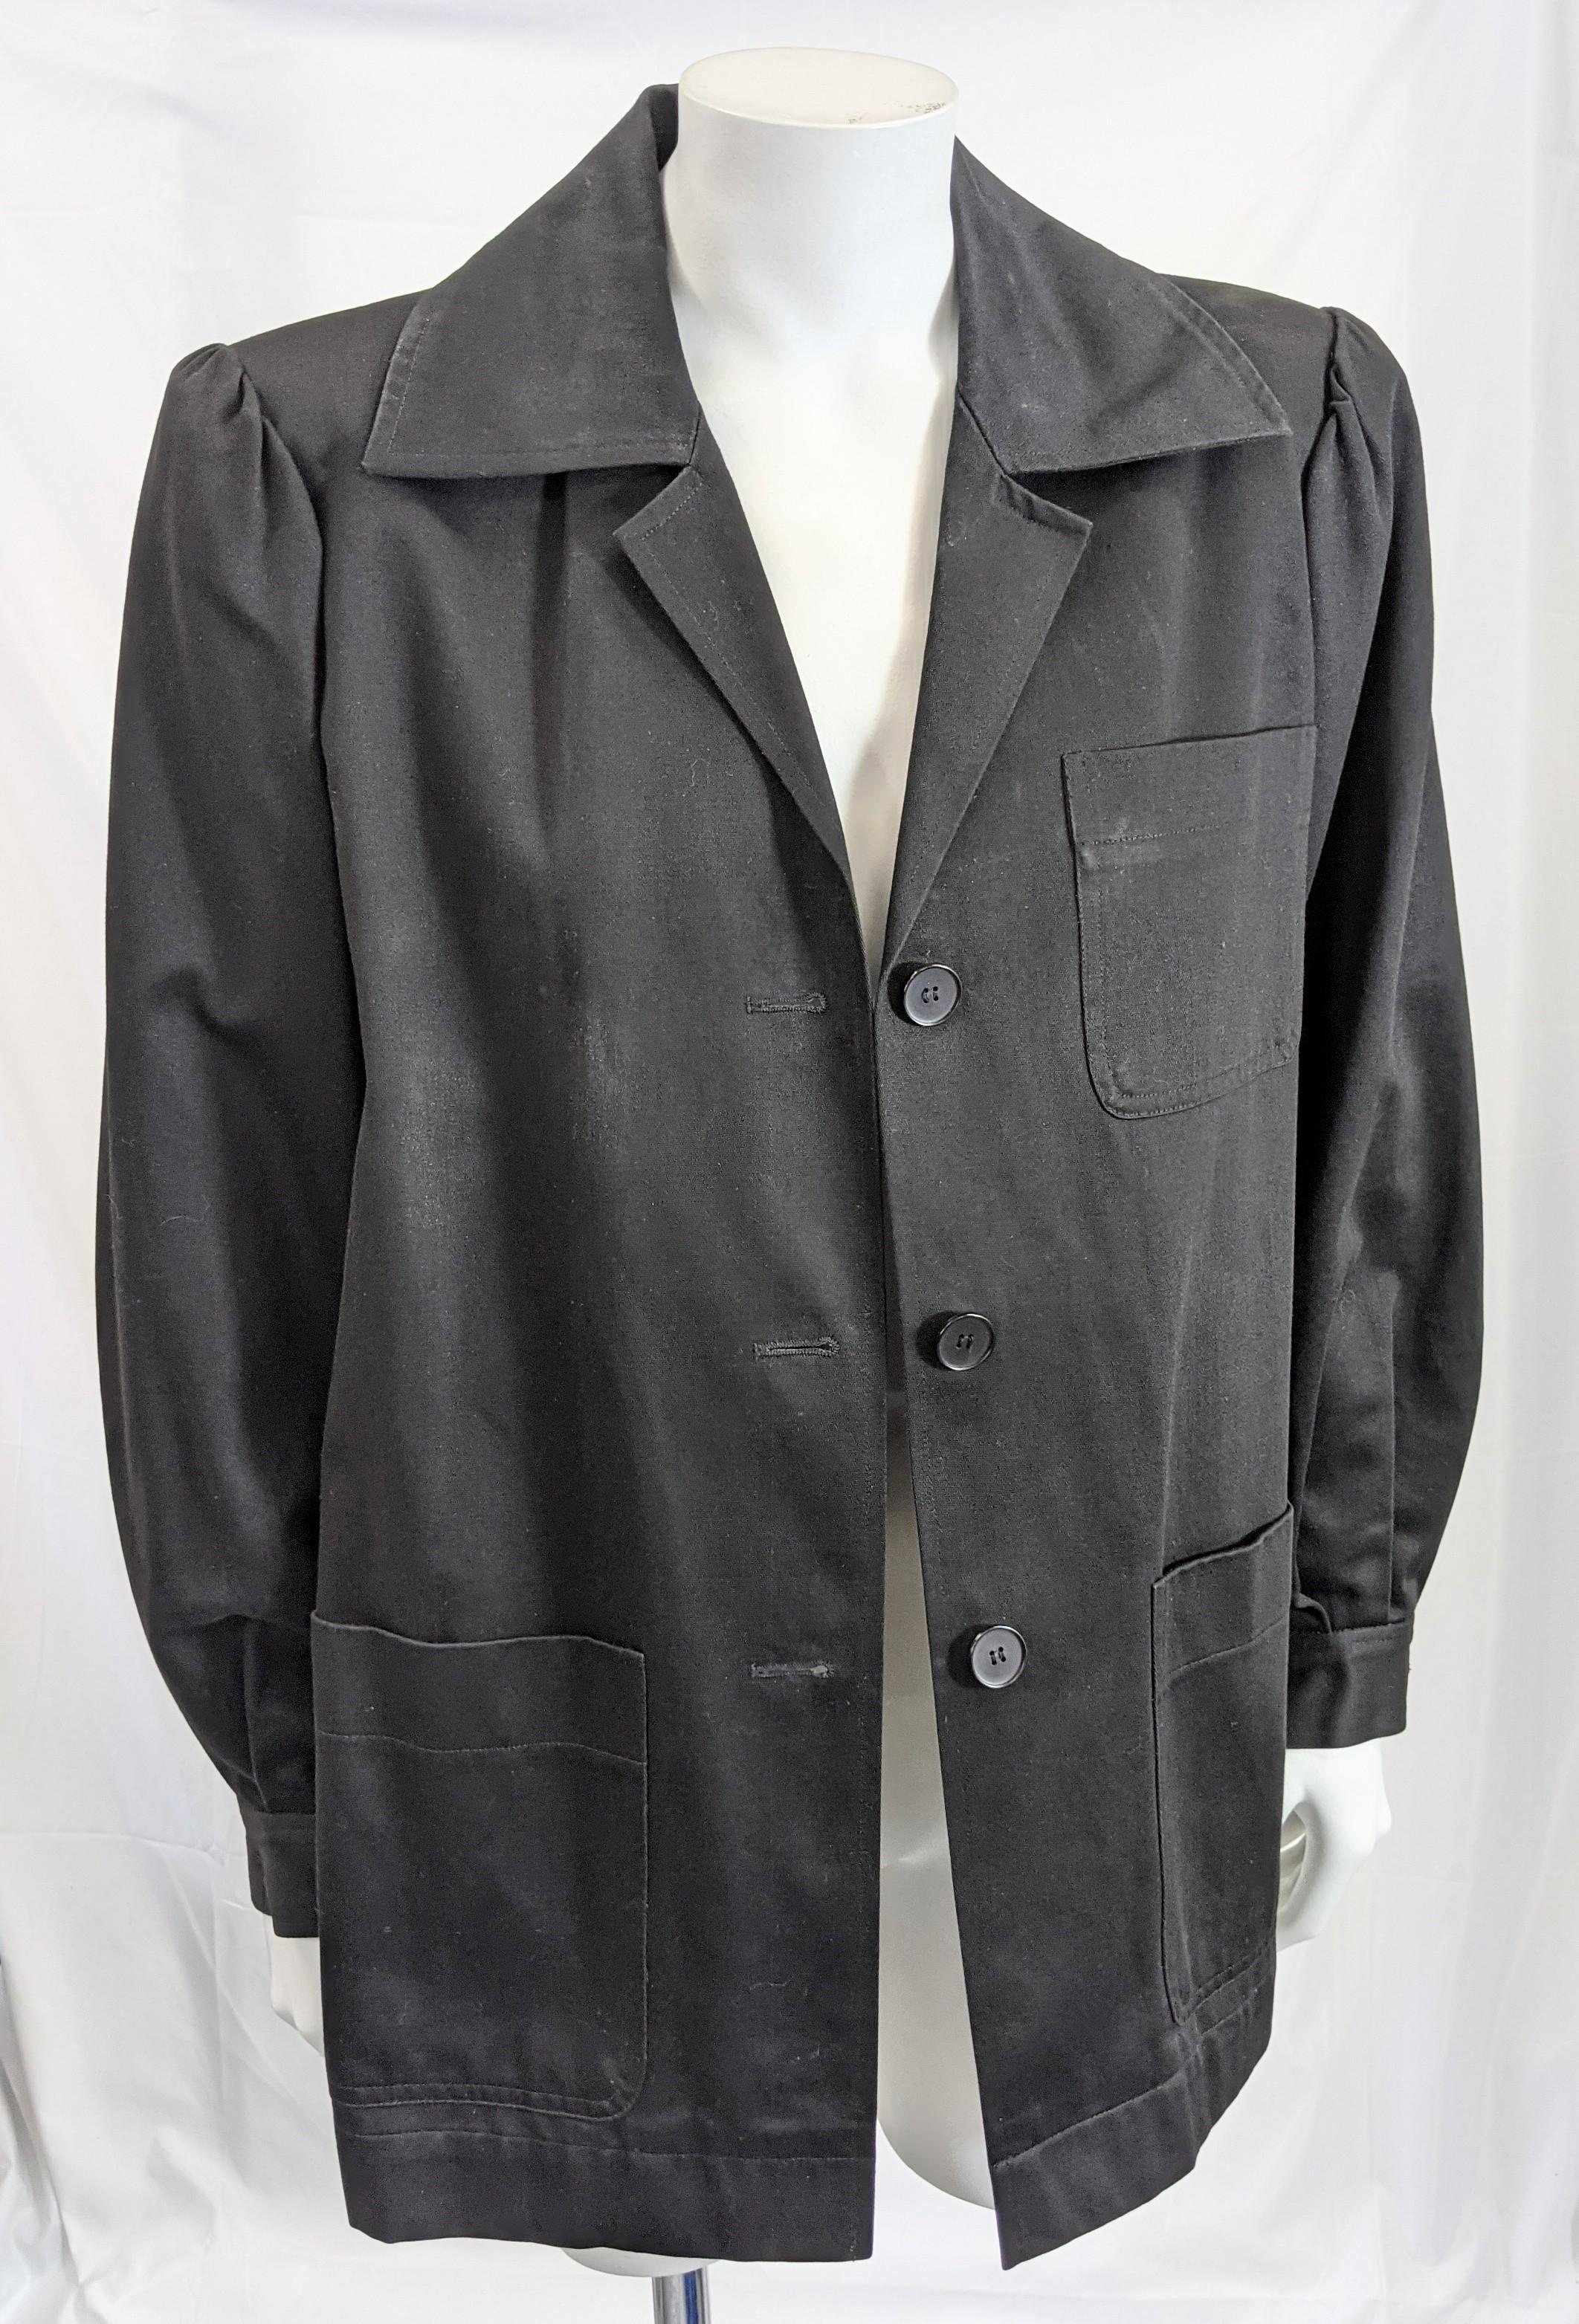 Early Yves Saint Laurent Black Cotton Twill Work Jacket from the 1970's. Patch pockets and gathered strong shoulder on YSL's take on this French work wear classic. 
Fully Lined. Size 34, France 1970's. Small size.